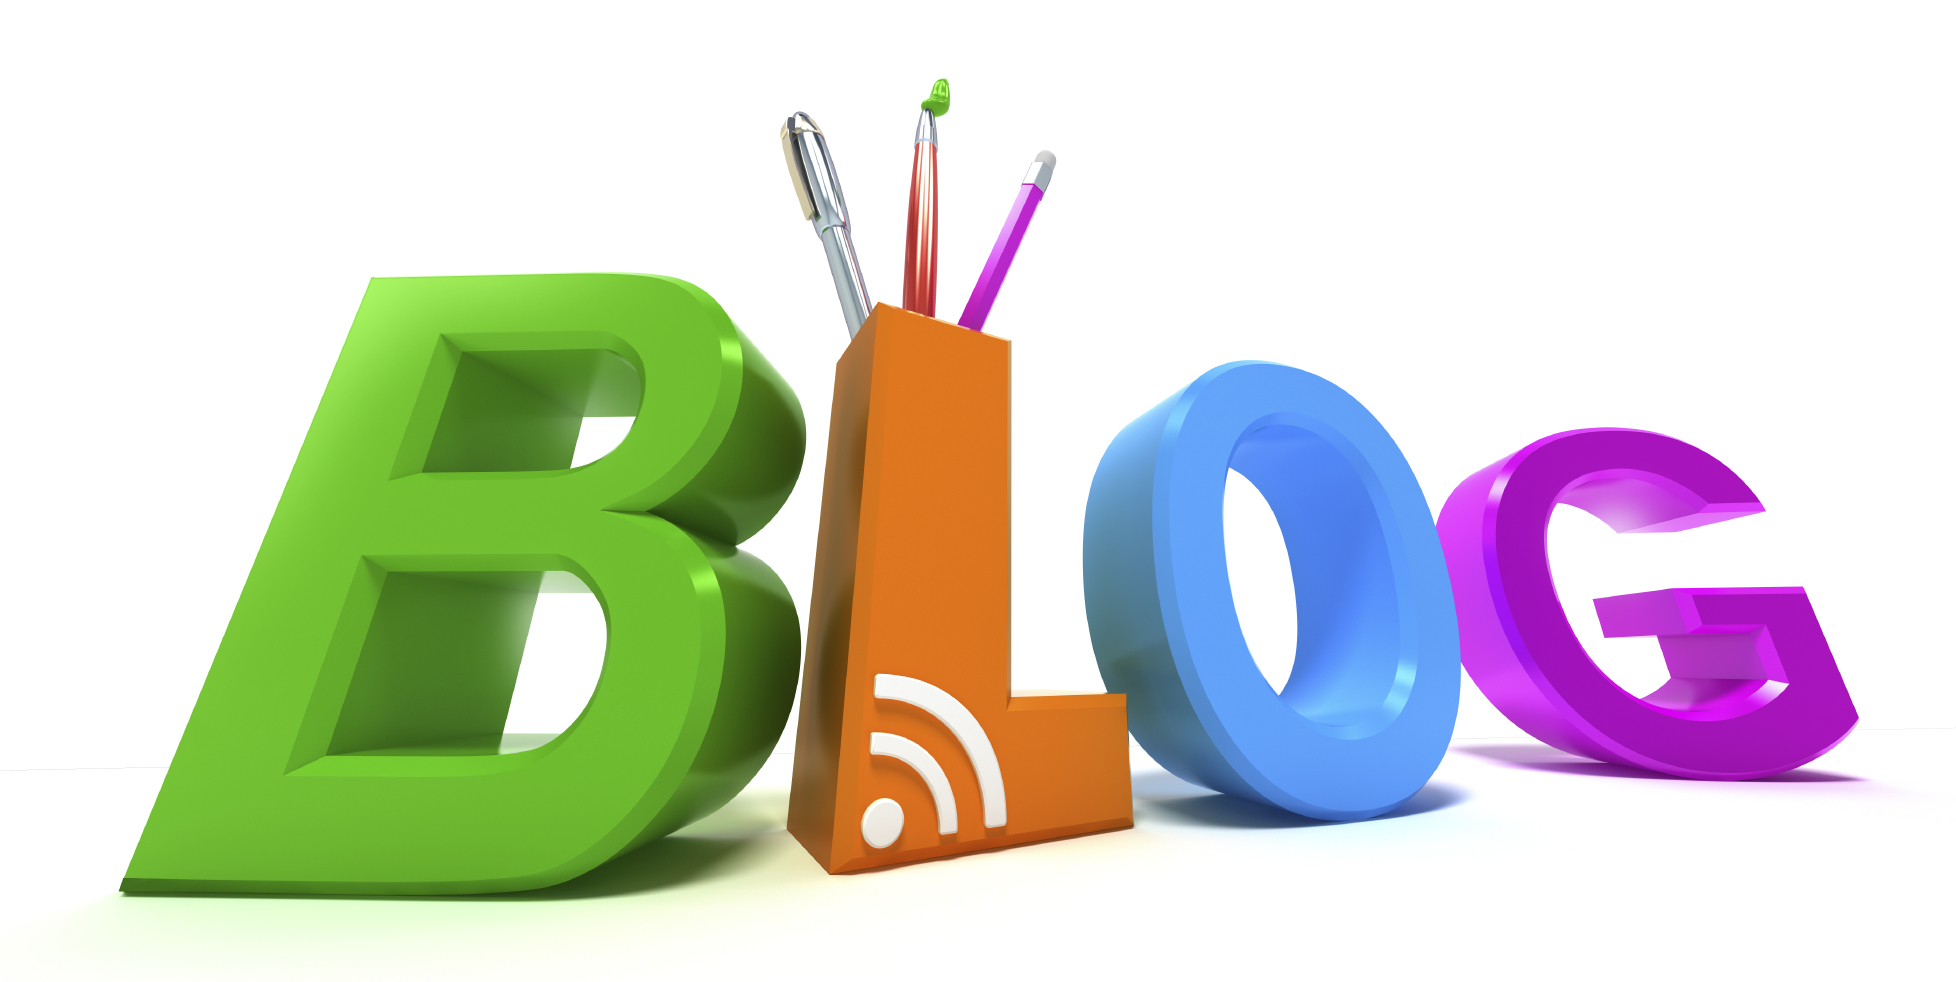 Blogs as Marketing Tools. A Blog Copywriter Can Help Grow Your Business